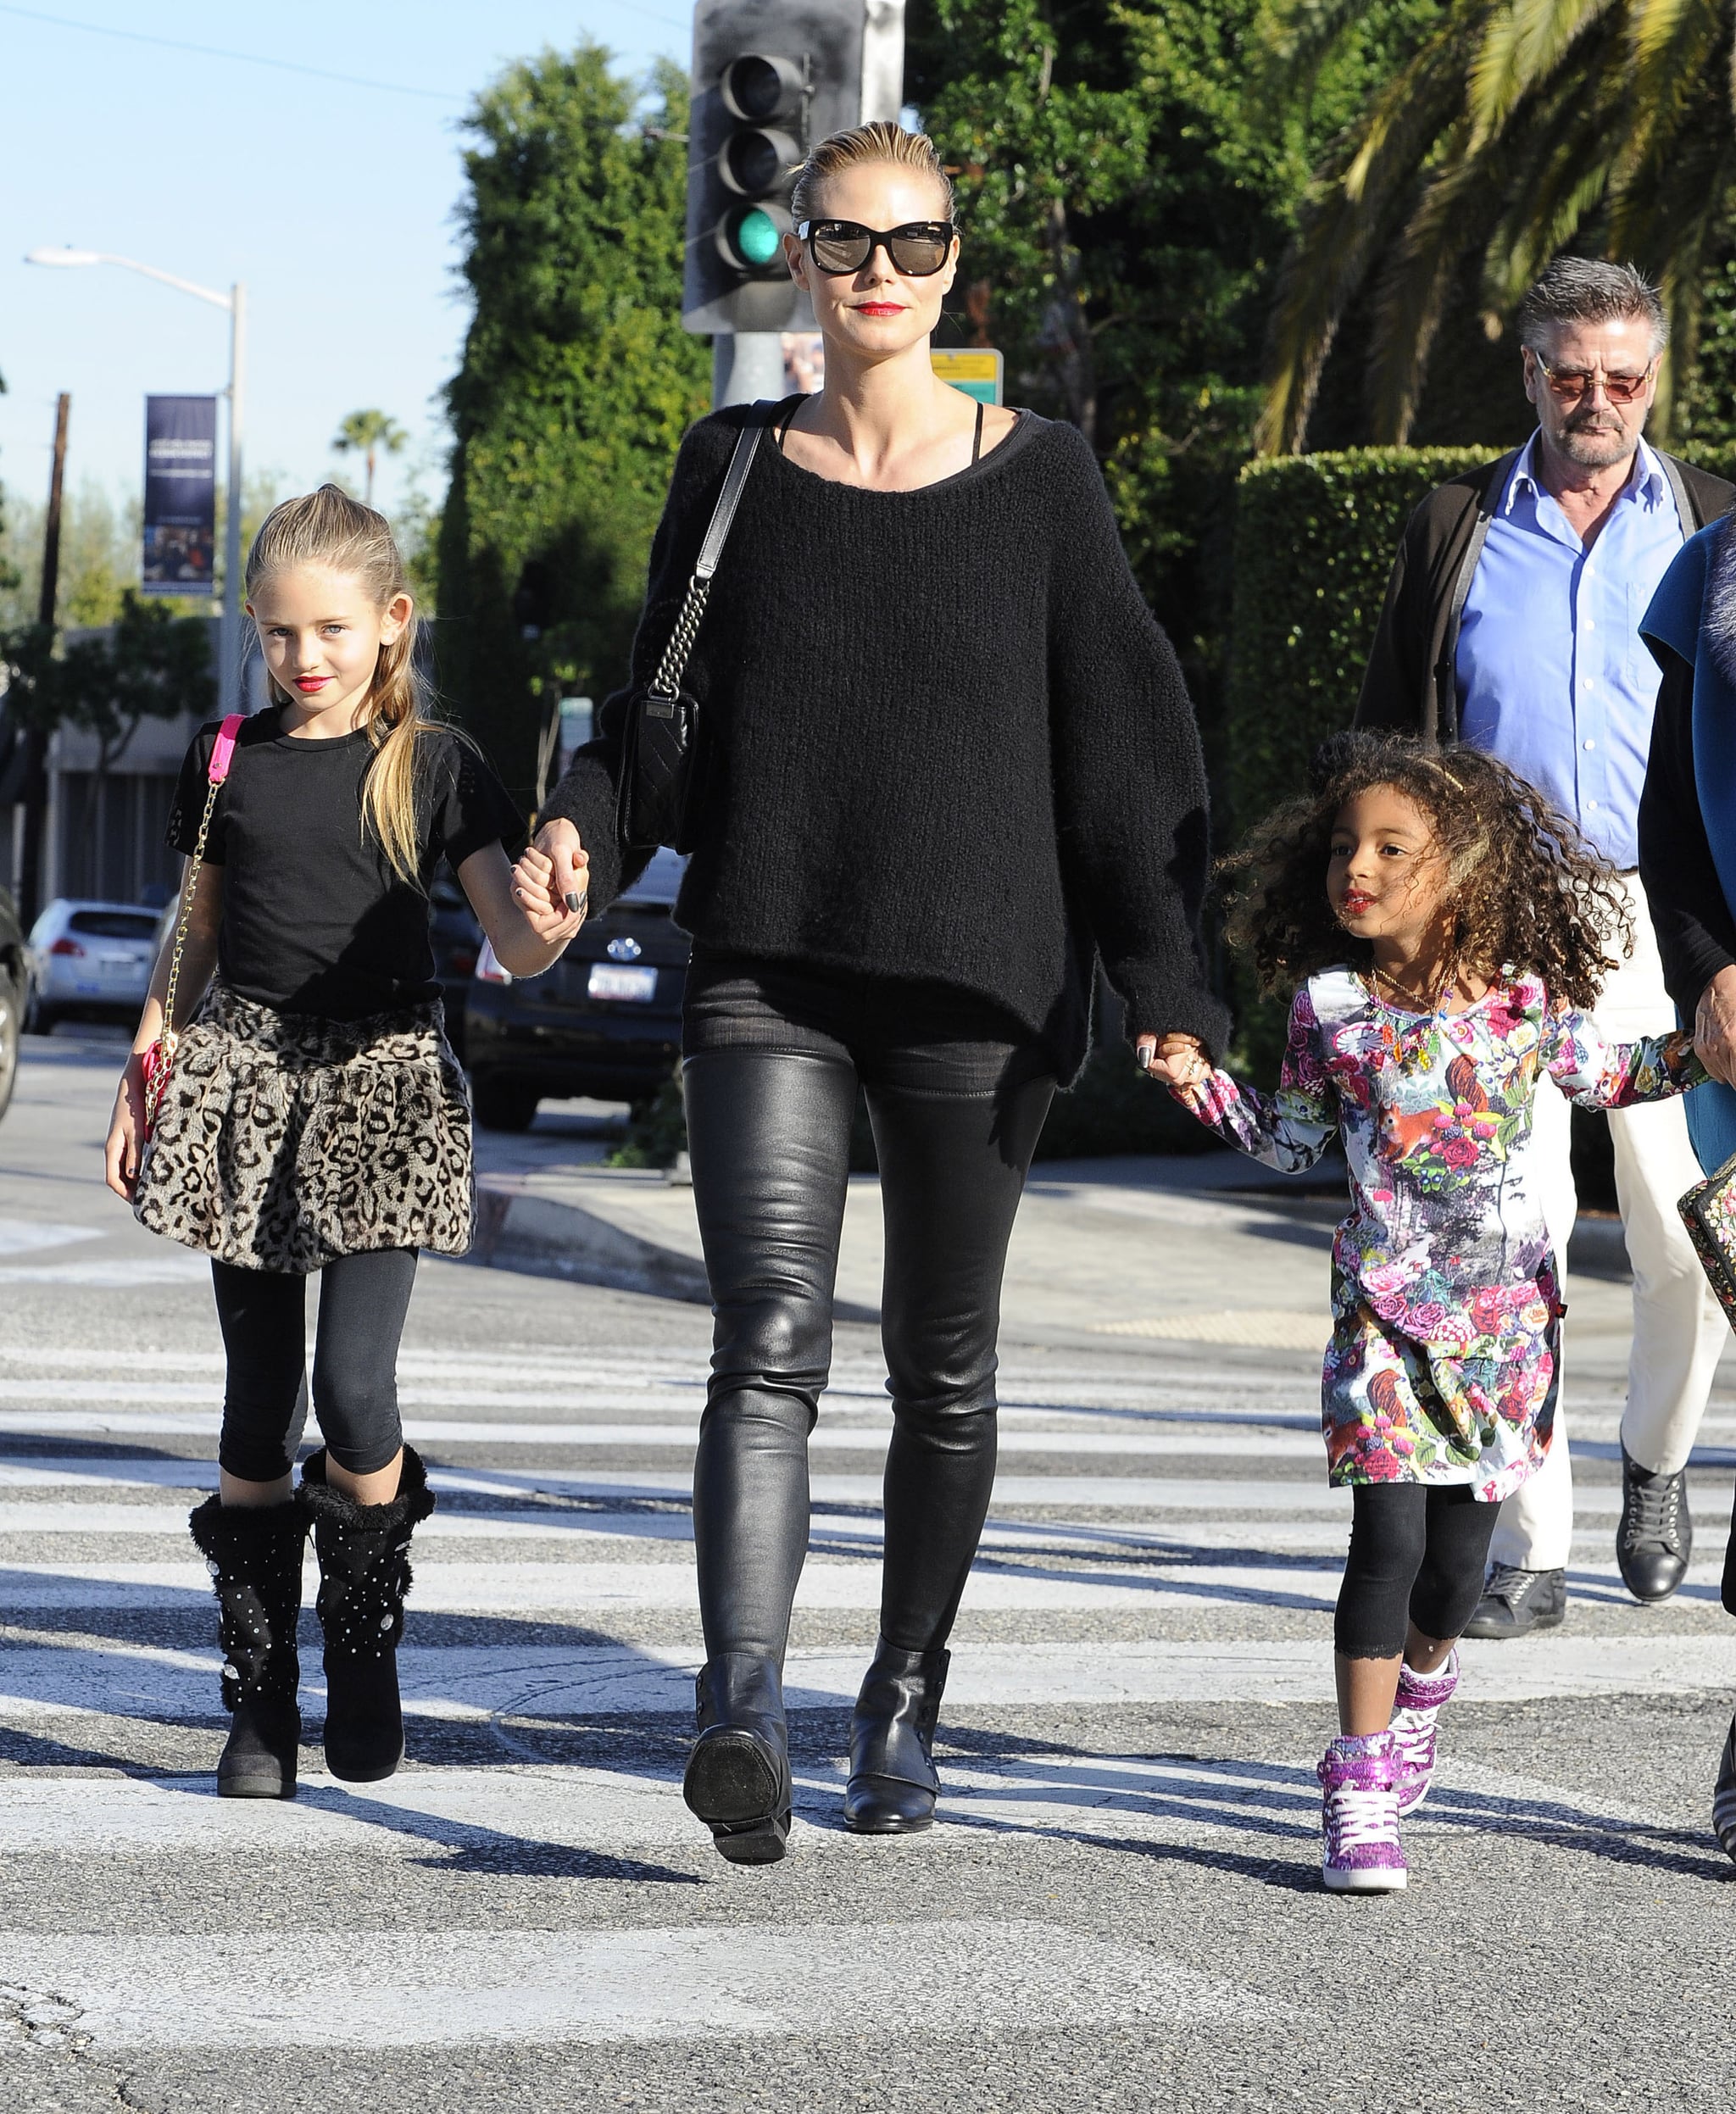 Heidi Klum kept her daughters, Leni and Lou, close for a family